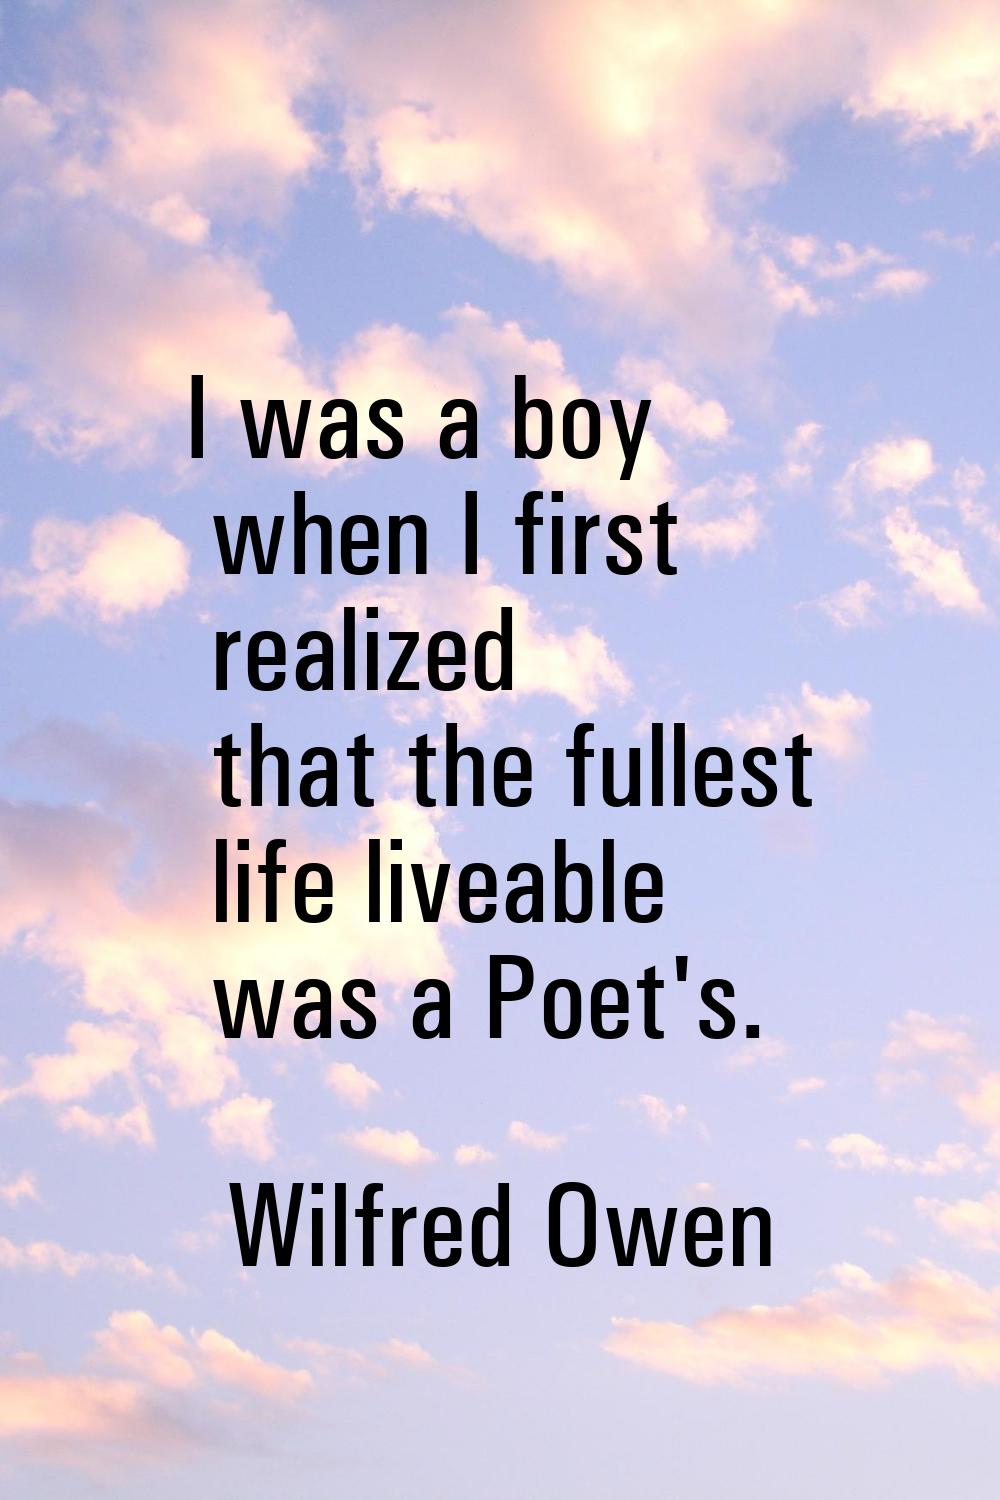 I was a boy when I first realized that the fullest life liveable was a Poet's.